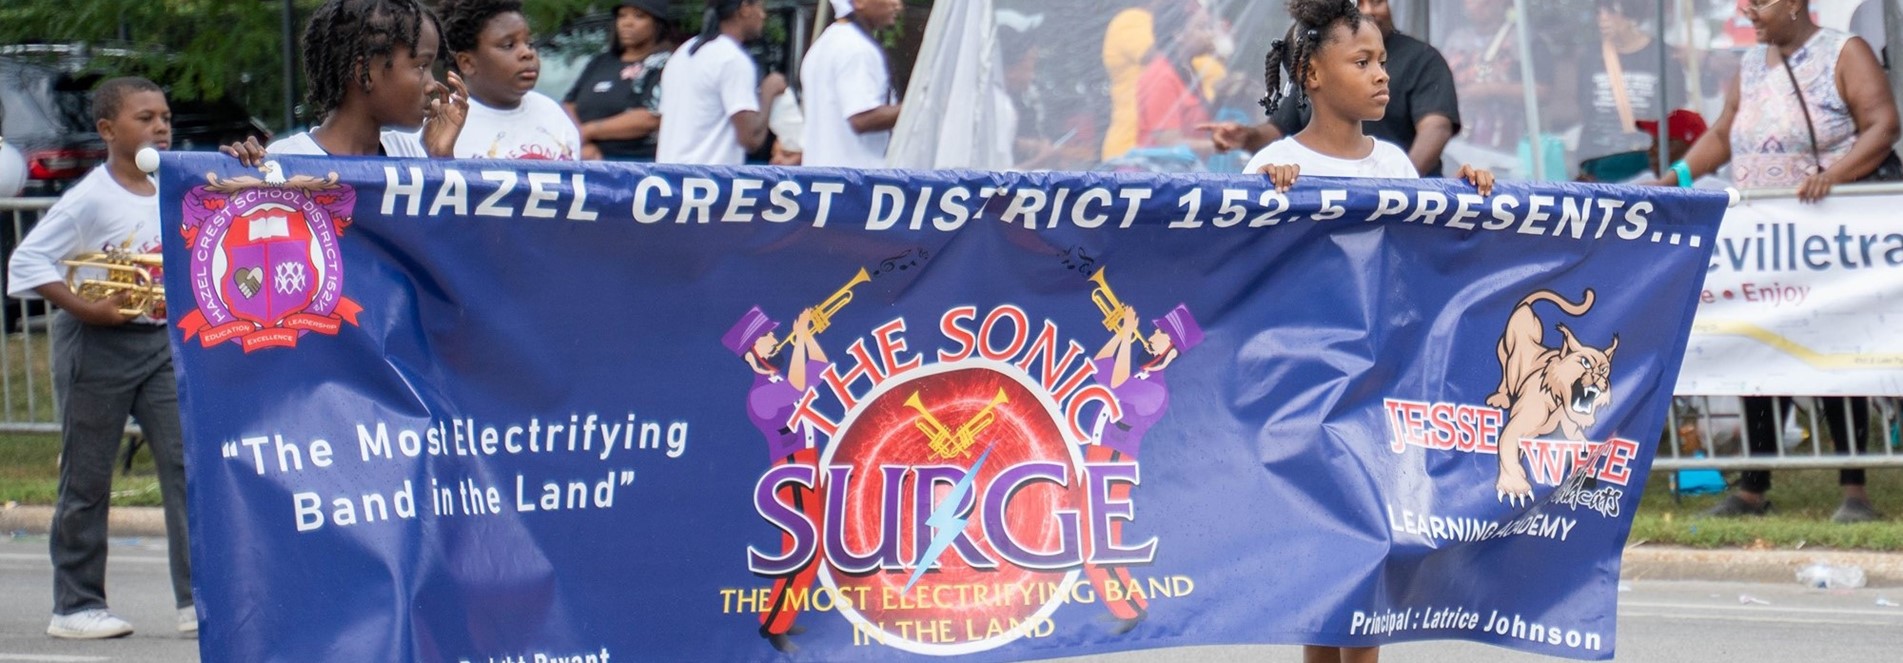 Our very own Sonic Surge Band at the 93rd Bud Billiken Parade